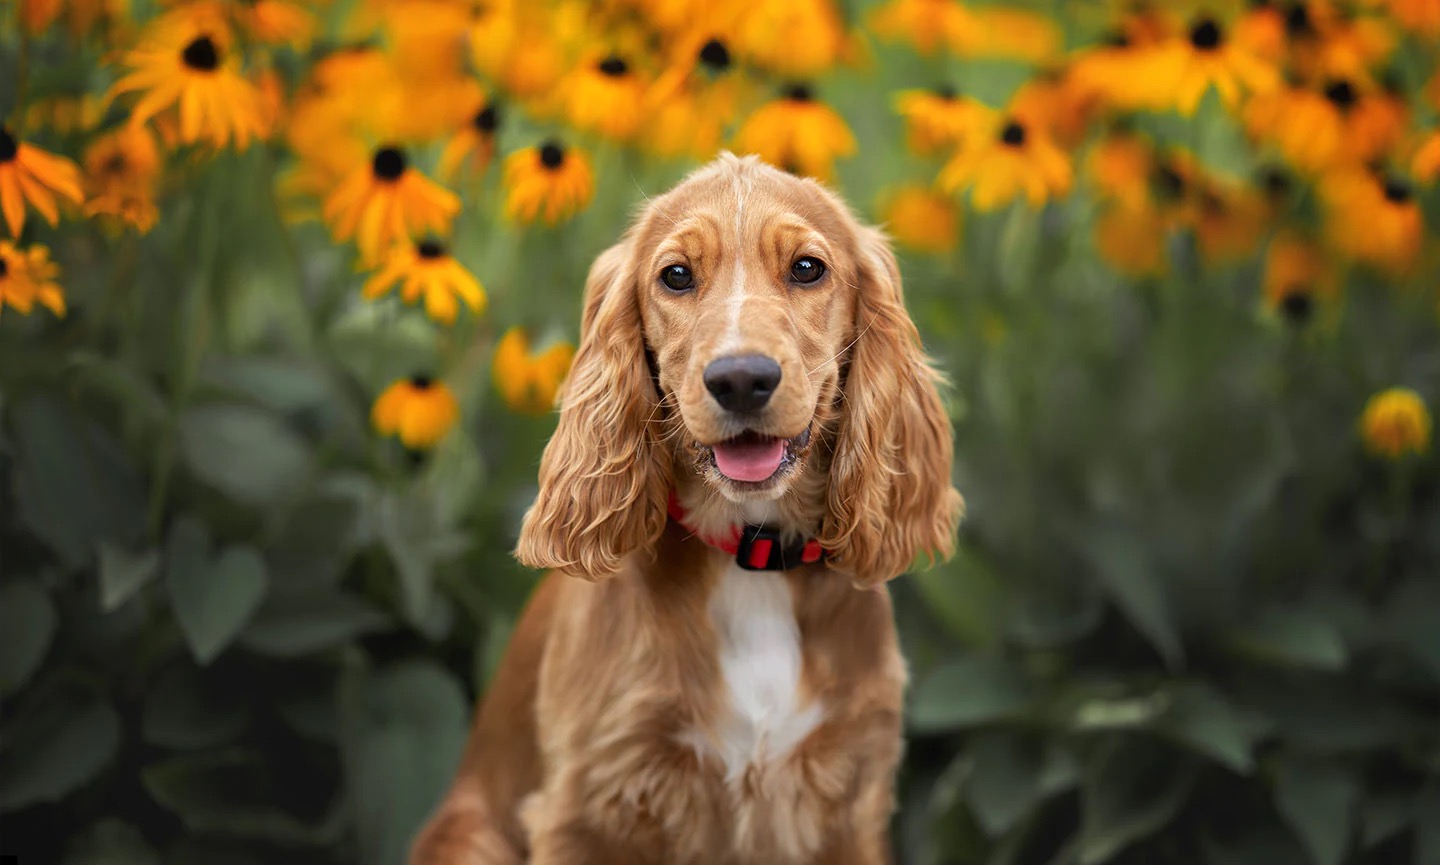 Only the Biggest Dog Lovers Can Identify All 20 of These Breeds 🐾 — Can You? English Cocker Spaniel